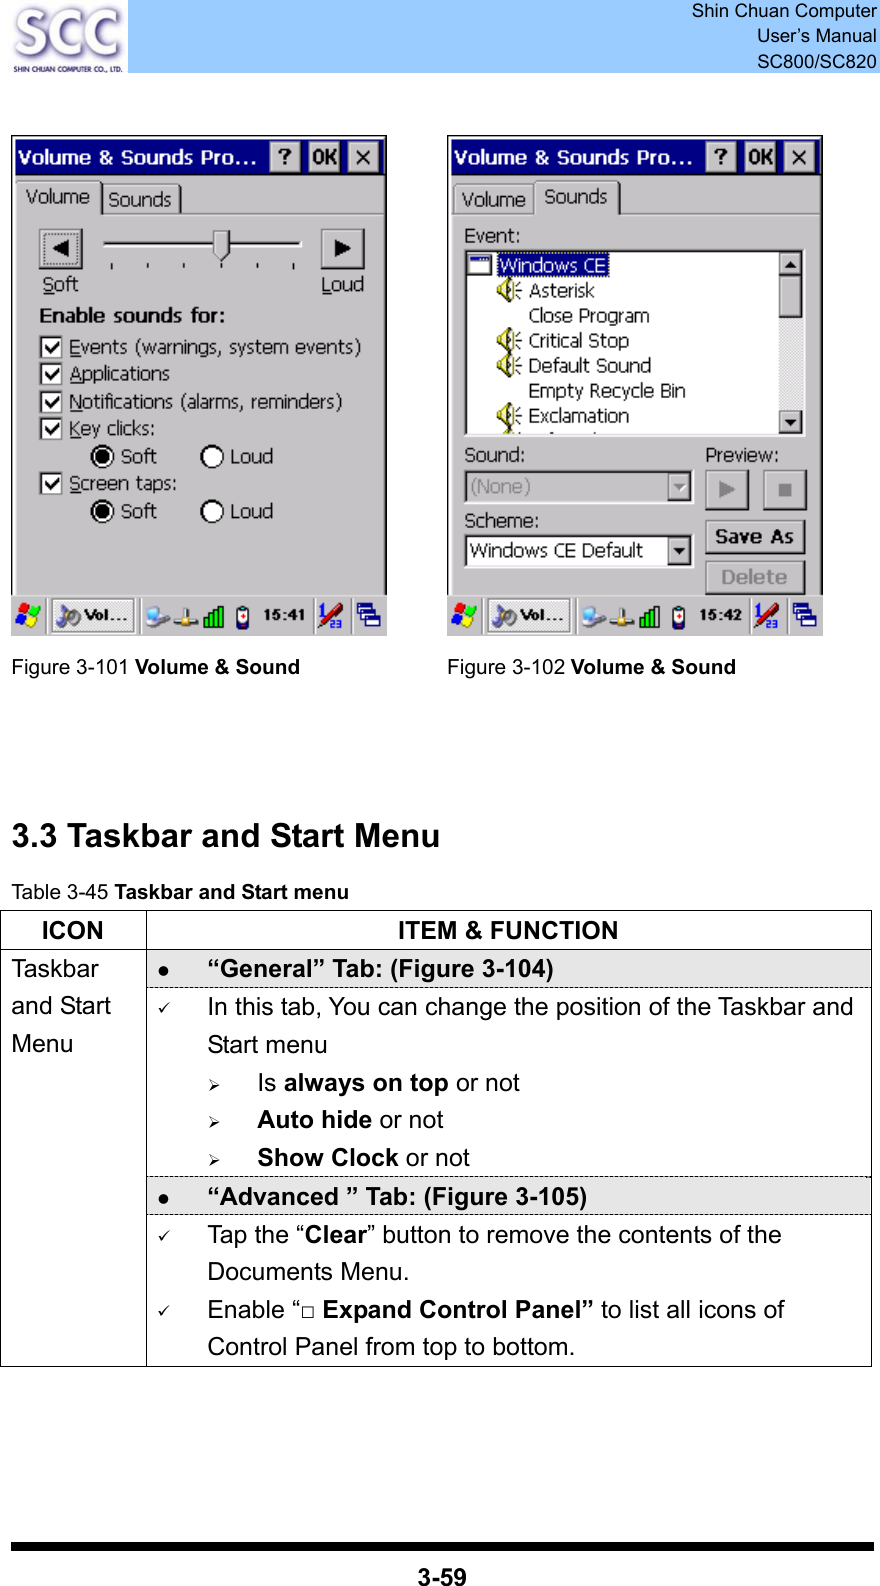  Shin Chuan Computer User’s Manual SC800/SC820  3-59     Figure 3-101 Volume &amp; Sound  Figure 3-102 Volume &amp; Sound    3.3 Taskbar and Start Menu Table 3-45 Taskbar and Start menu ICON  ITEM &amp; FUNCTION z “General” Tab: (Figure 3-104) 9 In this tab, You can change the position of the Taskbar and Start menu   ¾ Is always on top or not ¾ Auto hide or not ¾ Show Clock or not z “Advanced ” Tab: (Figure 3-105) Taskbar and Start Menu 9 Tap the “Clear” button to remove the contents of the Documents Menu. 9 Enable “□ Expand Control Panel” to list all icons of Control Panel from top to bottom.    